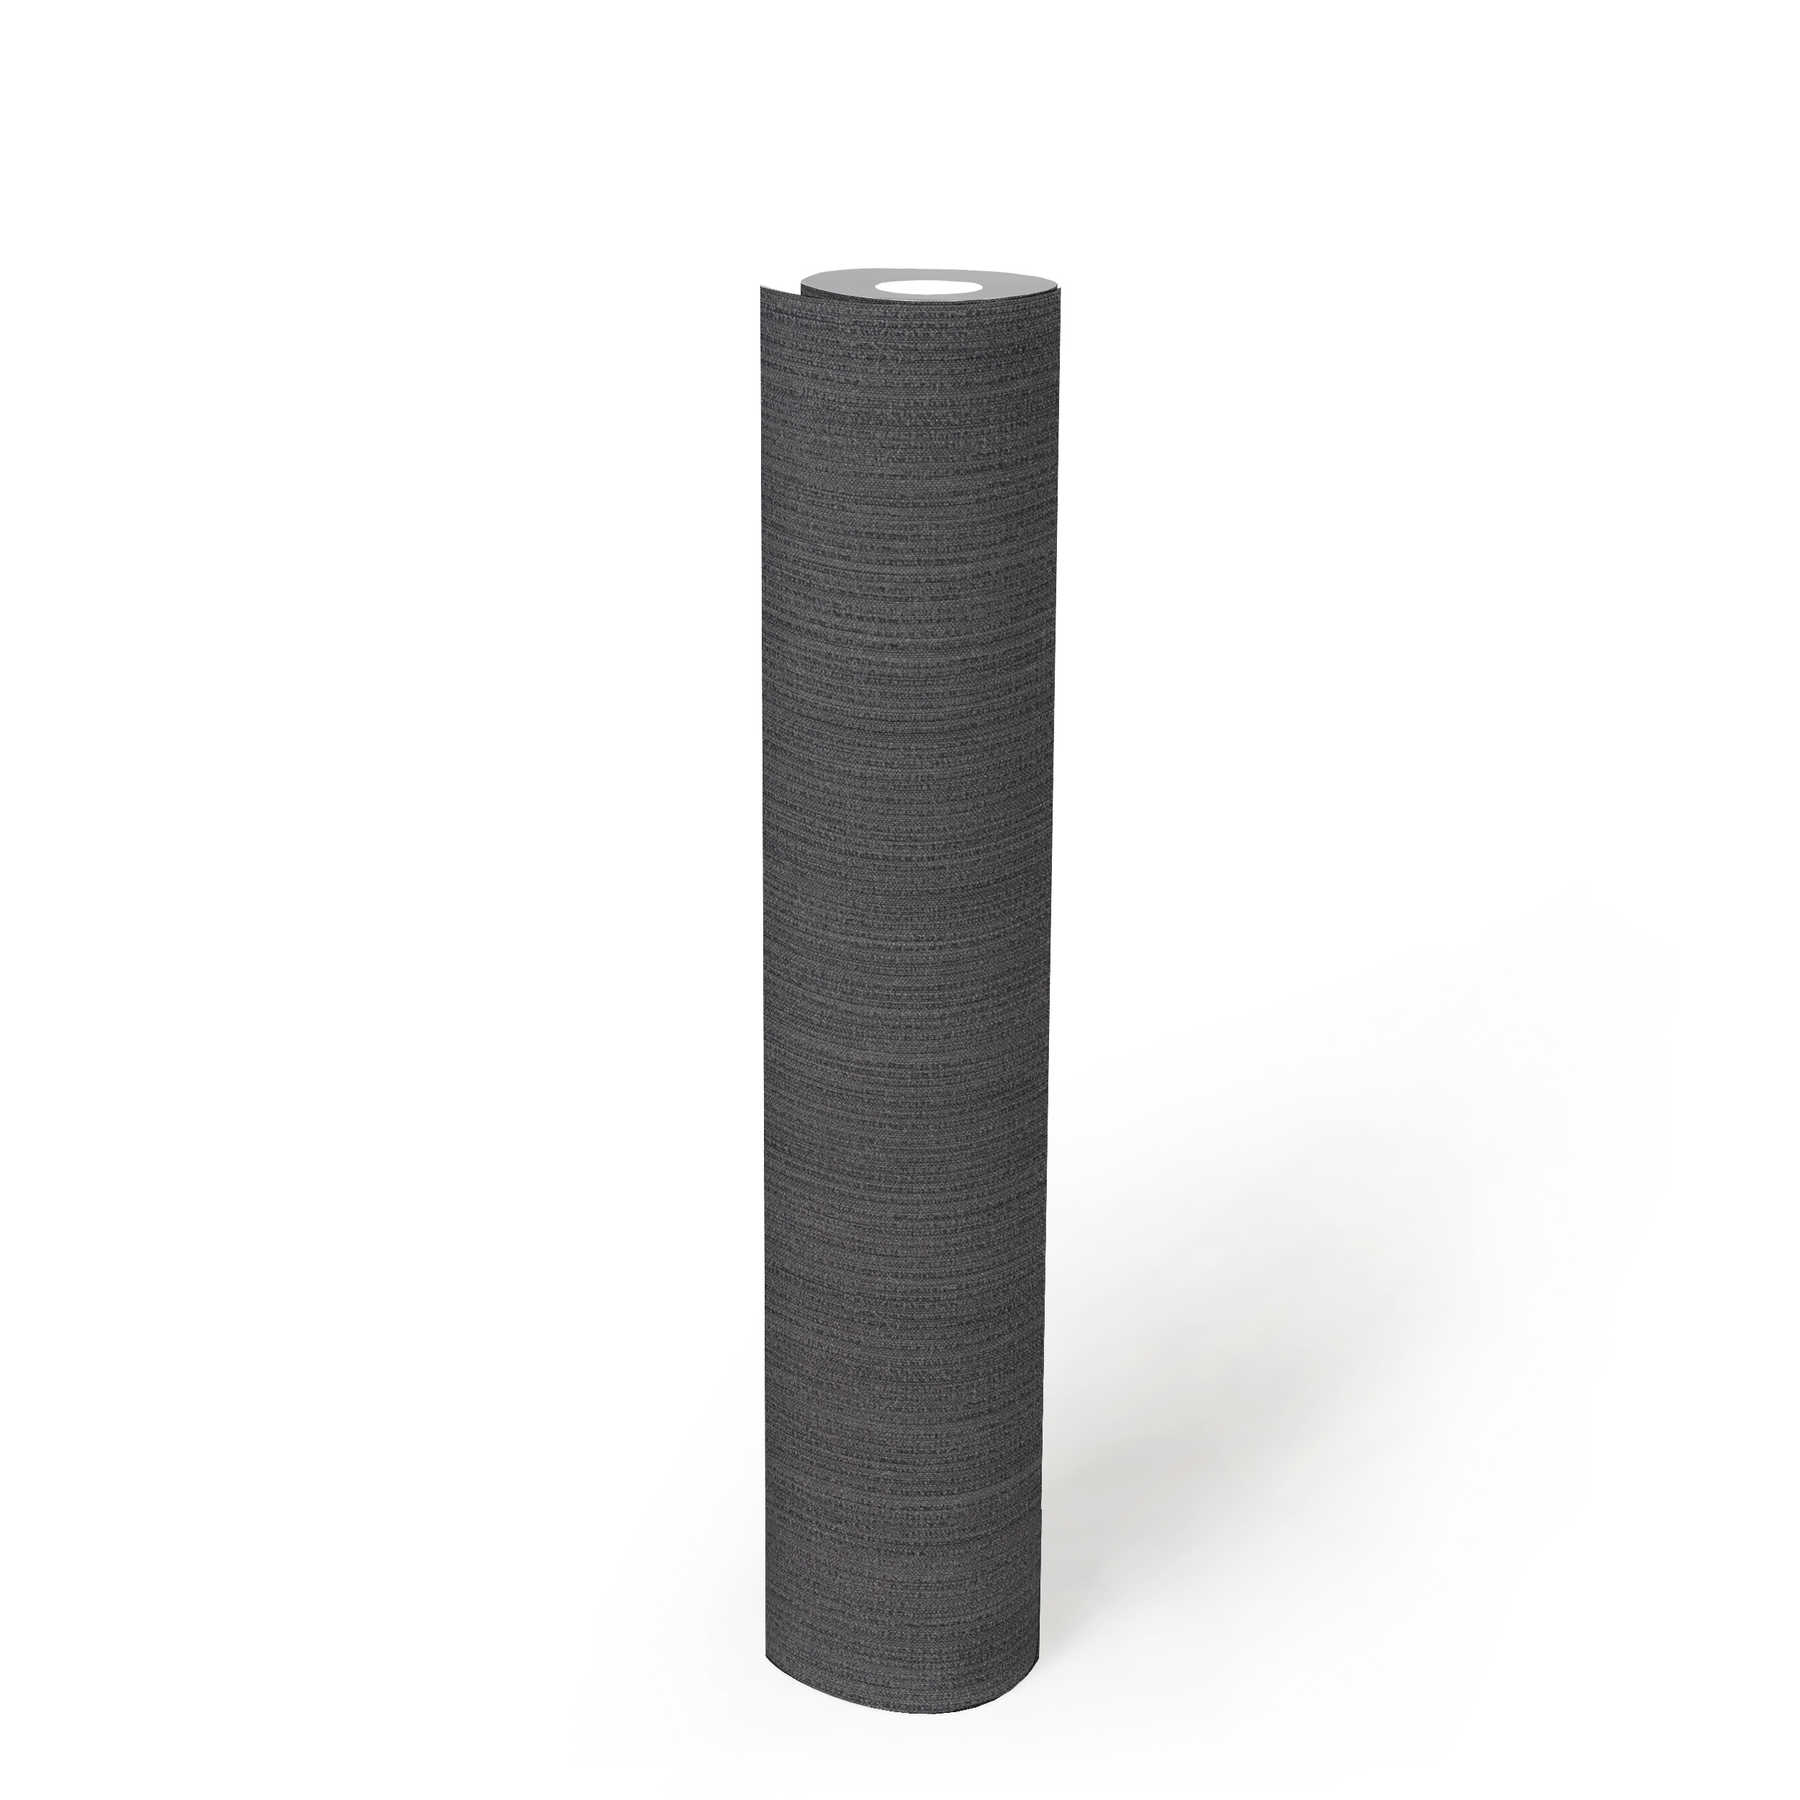             Plain wallpaper MICHALSKY with structure pattern - anthracite
        